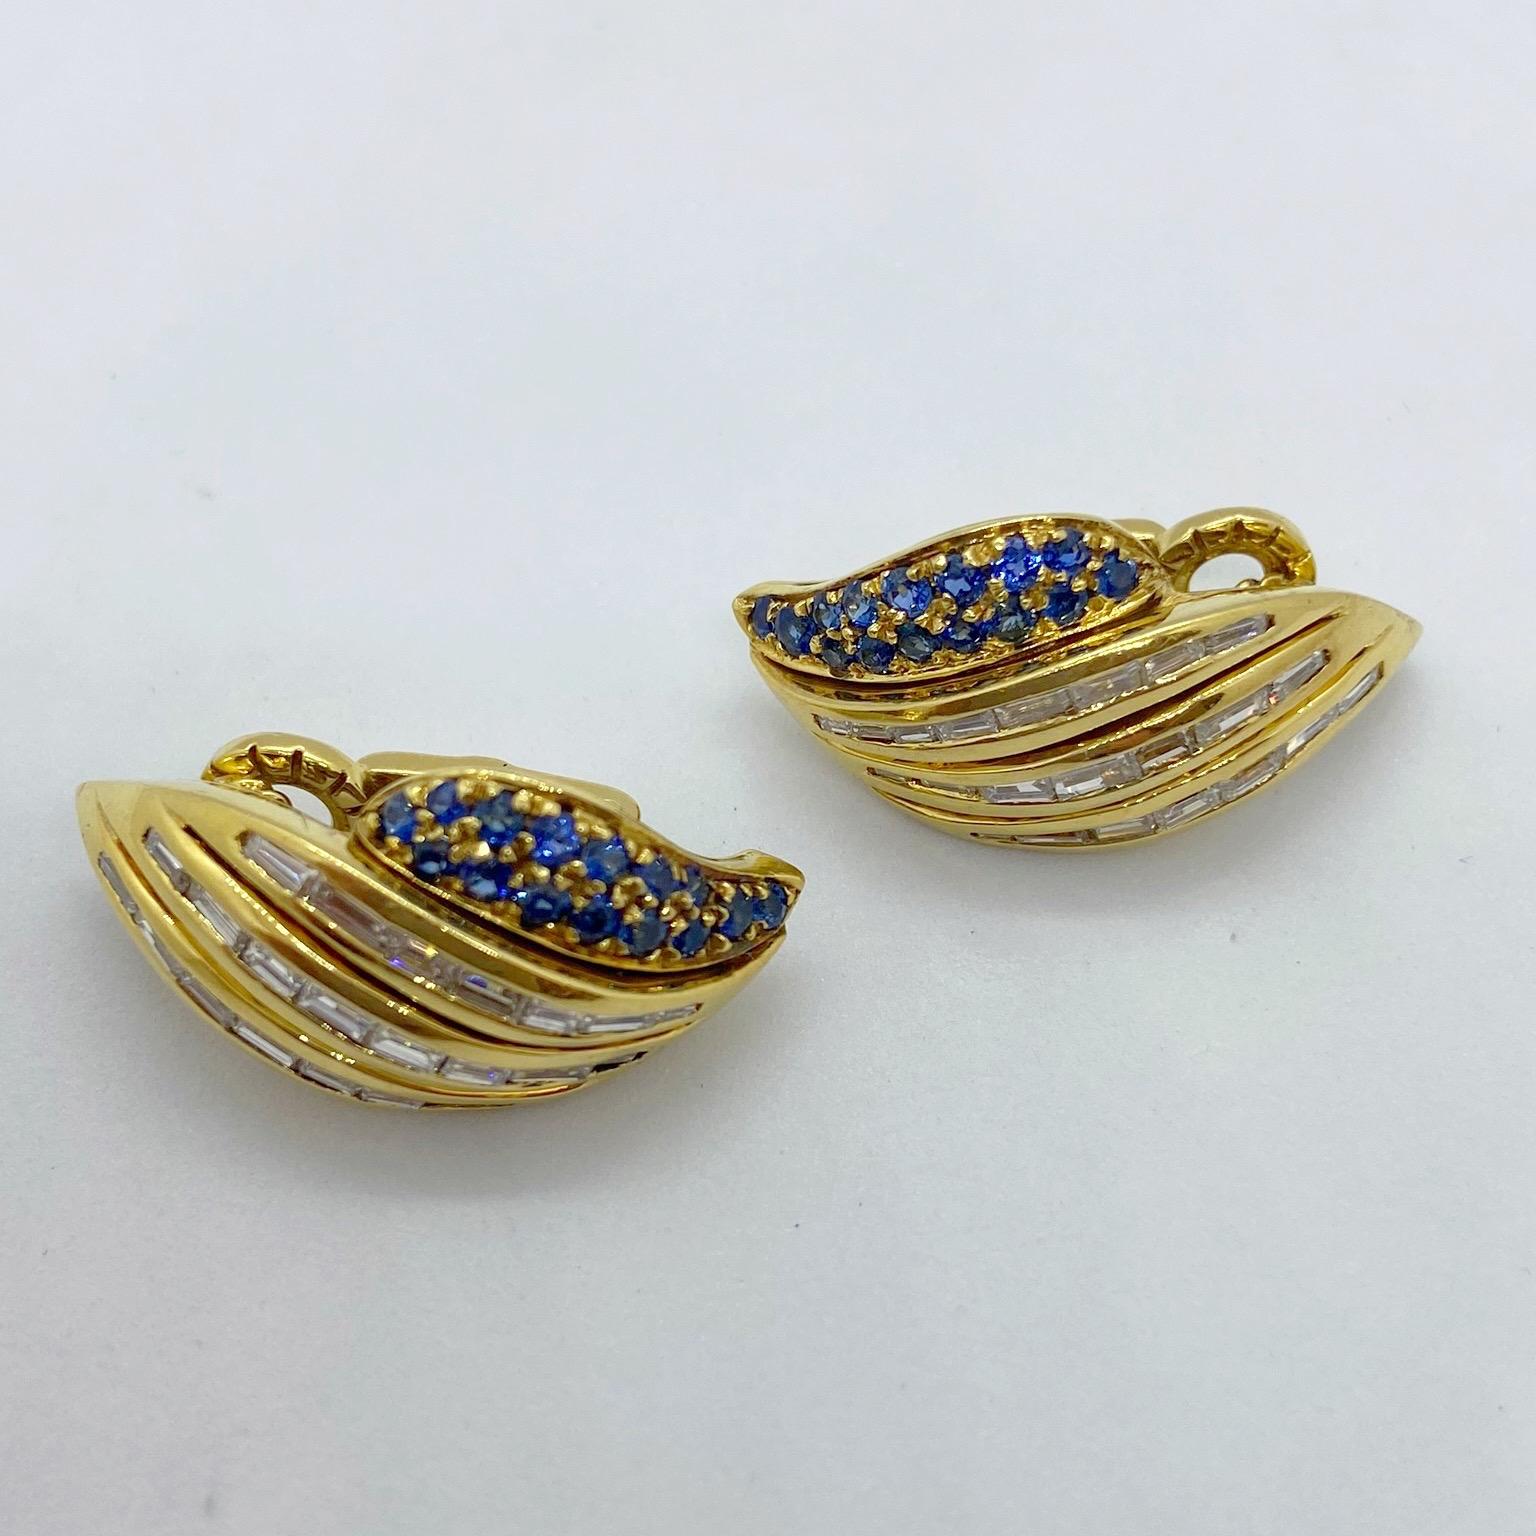 A lovely pair of wing shaped 18 karat yellow gold earrings set with 3 rows of Diamond Baguettes and 2 rows of round Blue Sapphires. The earrings measure 1